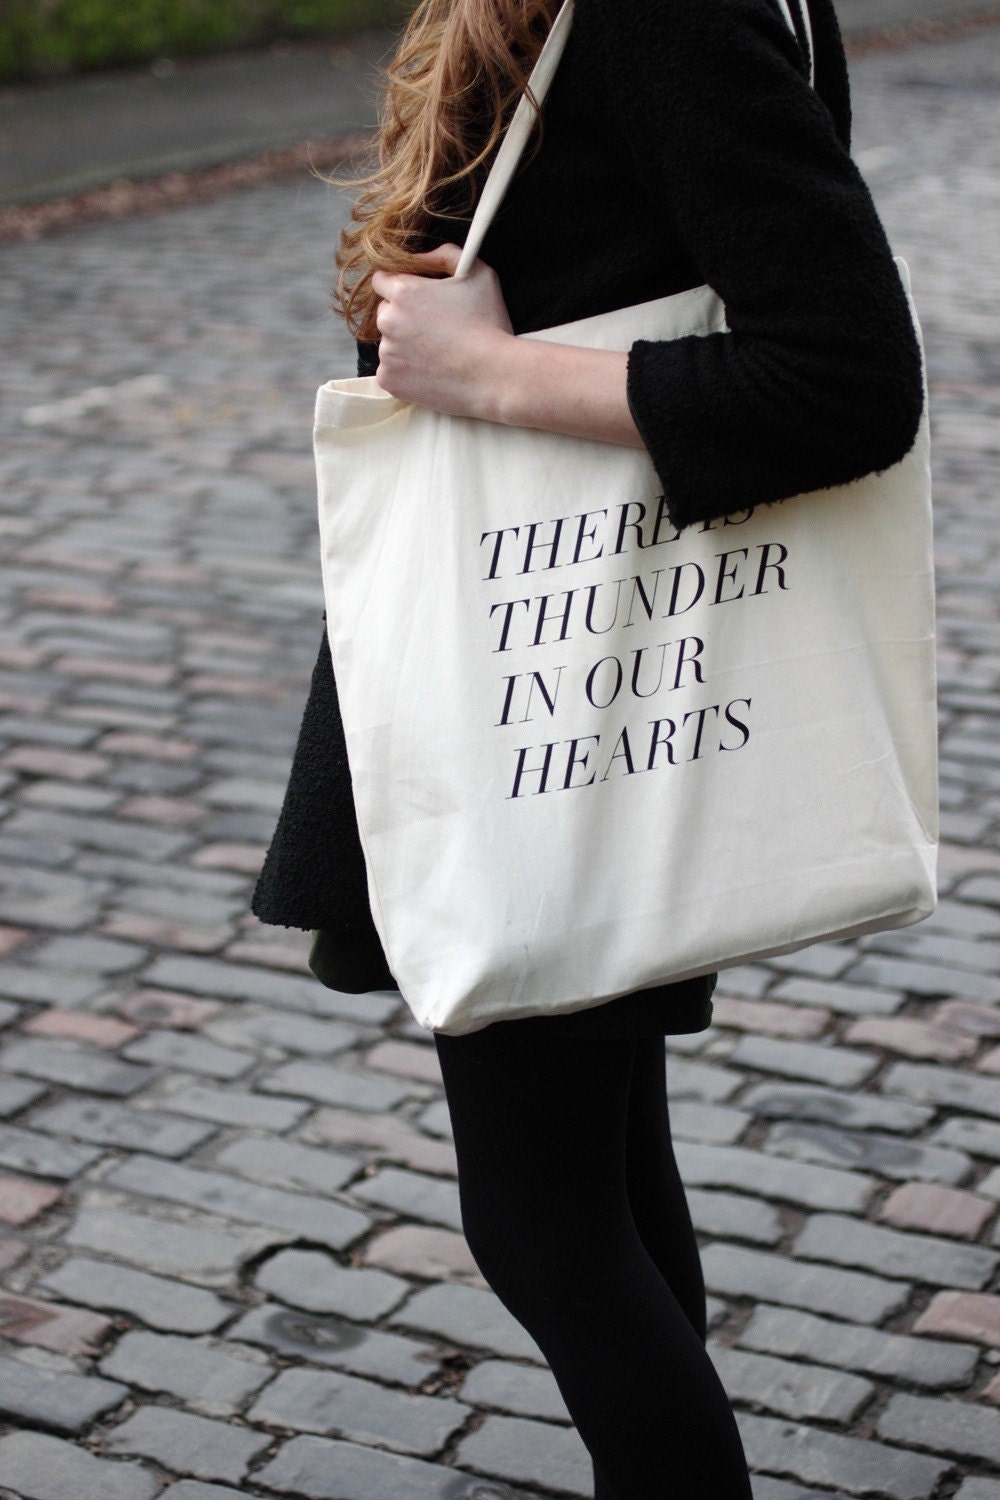 thunder in our hearts tote